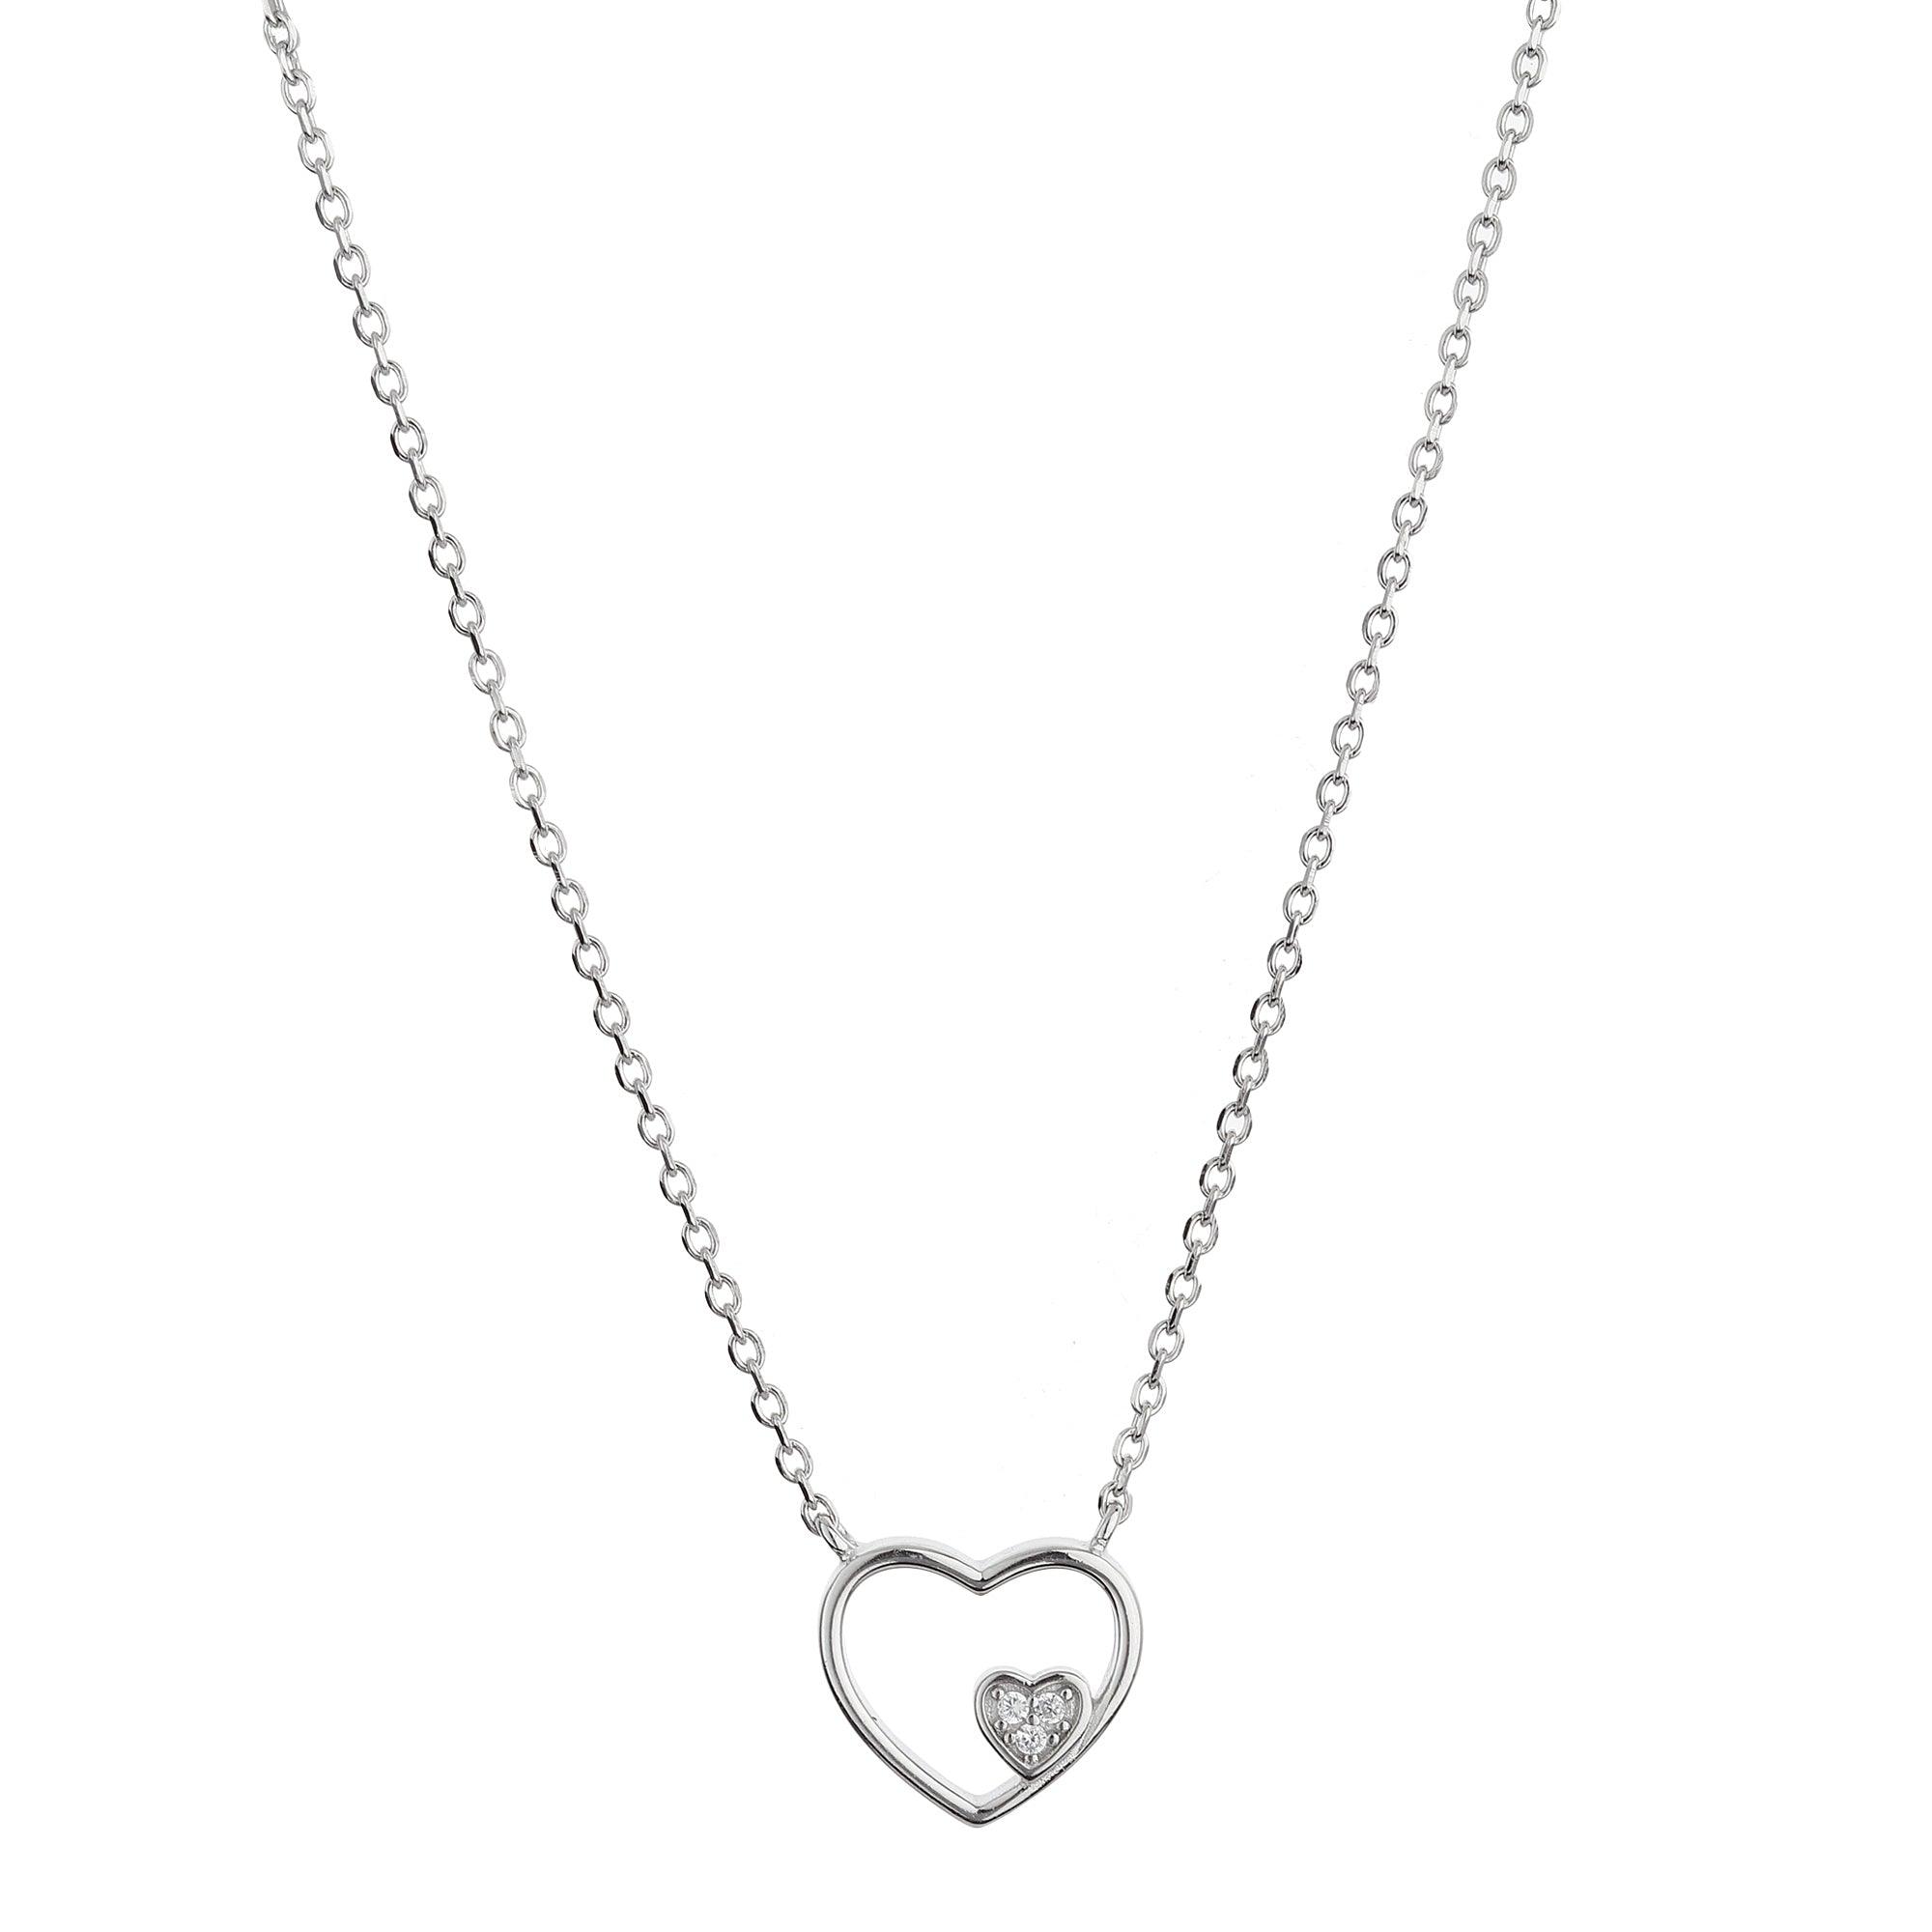 The Bling Silver Pendant - silvermark